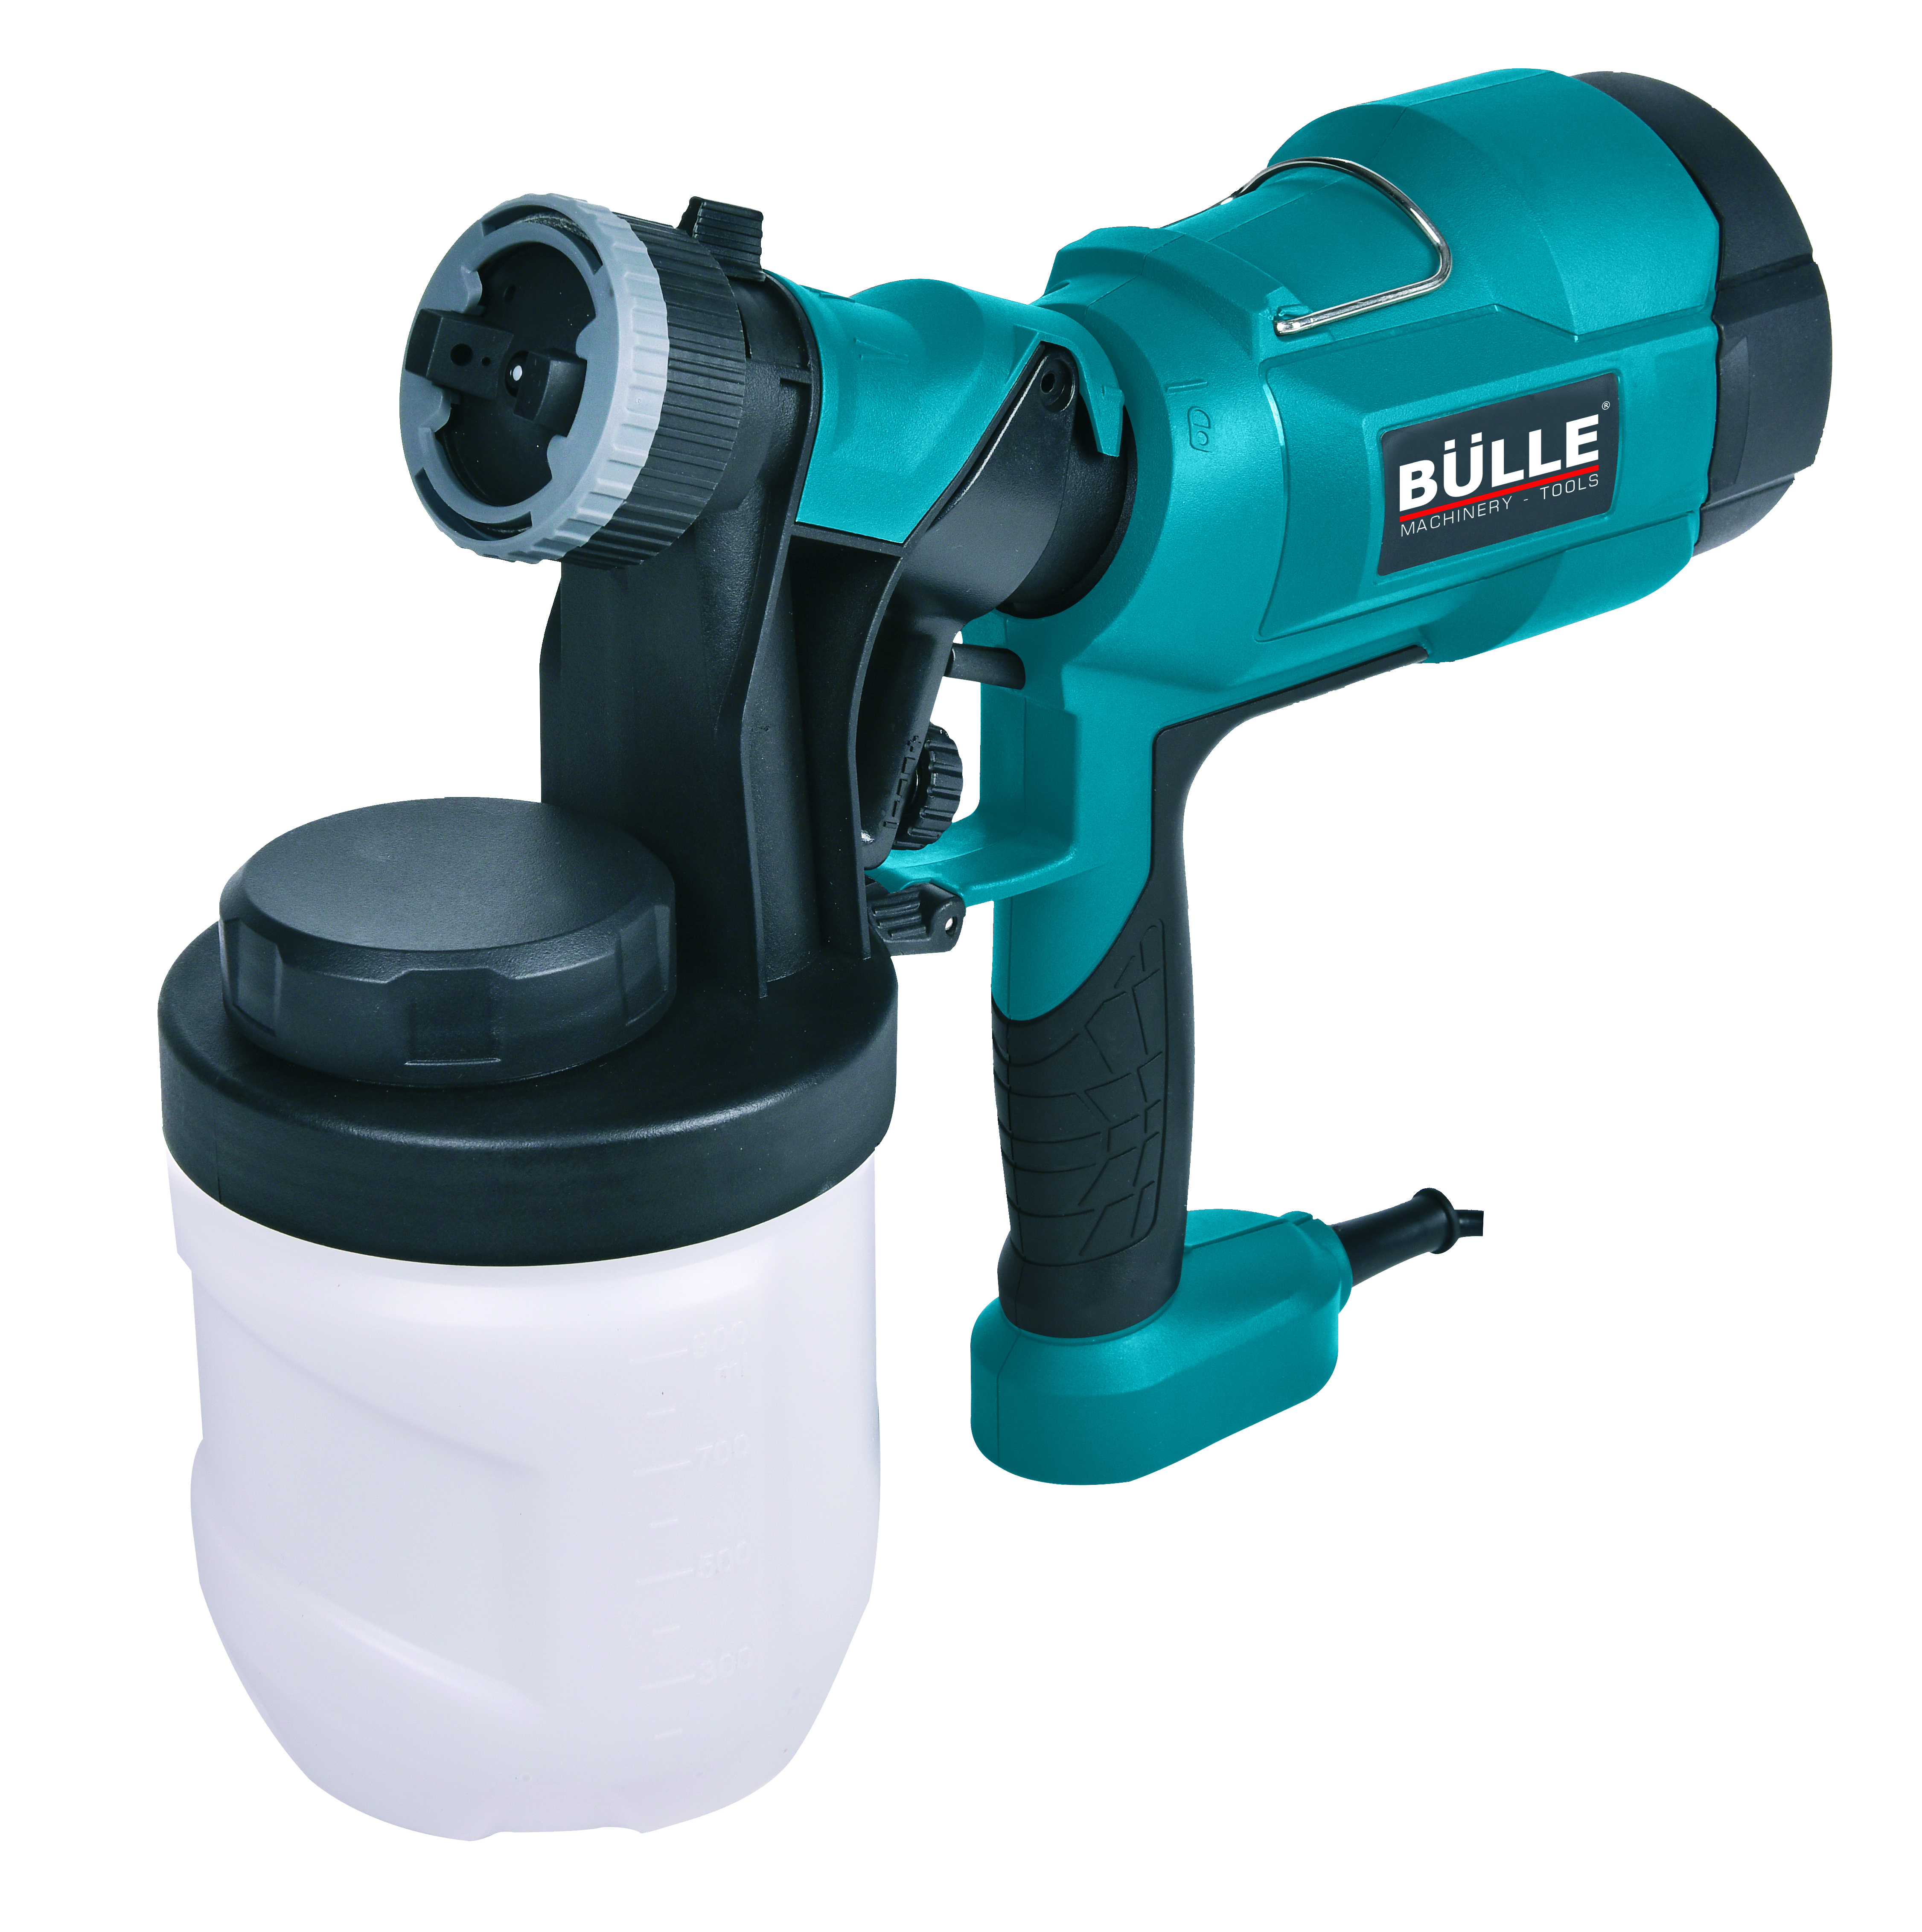 Electric Airless Paint Sprayer HLVP 500W Bulle - 2